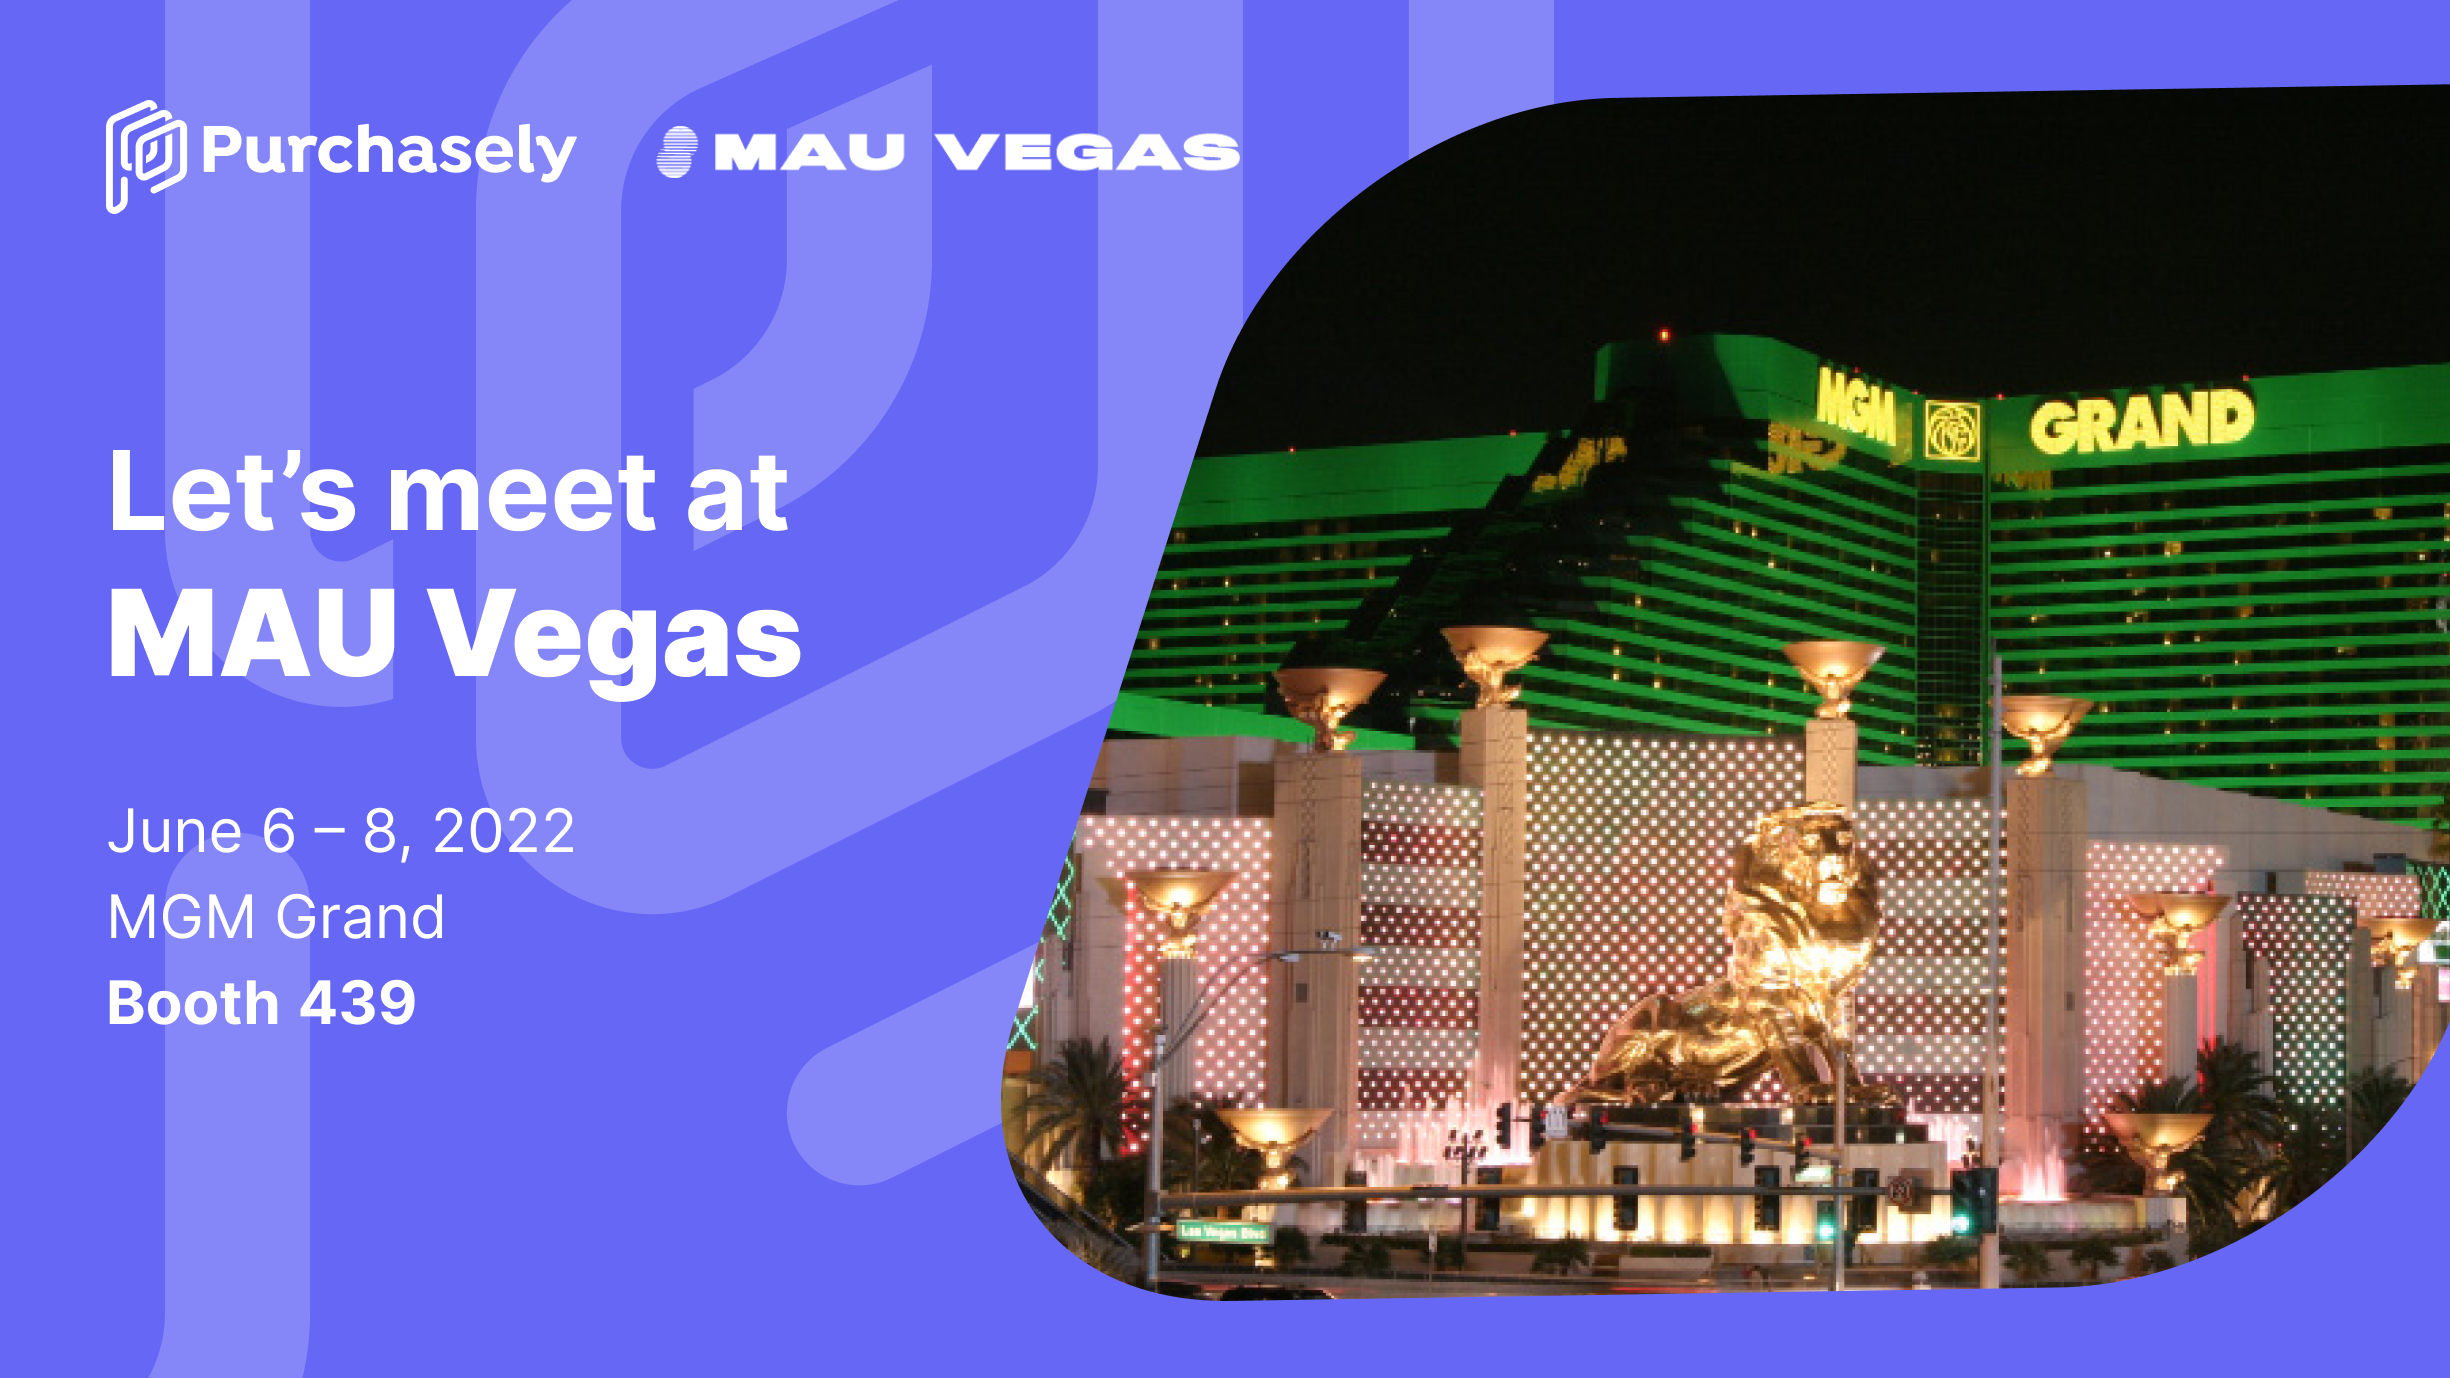 Meet Purchasely at MAU Vegas 2022